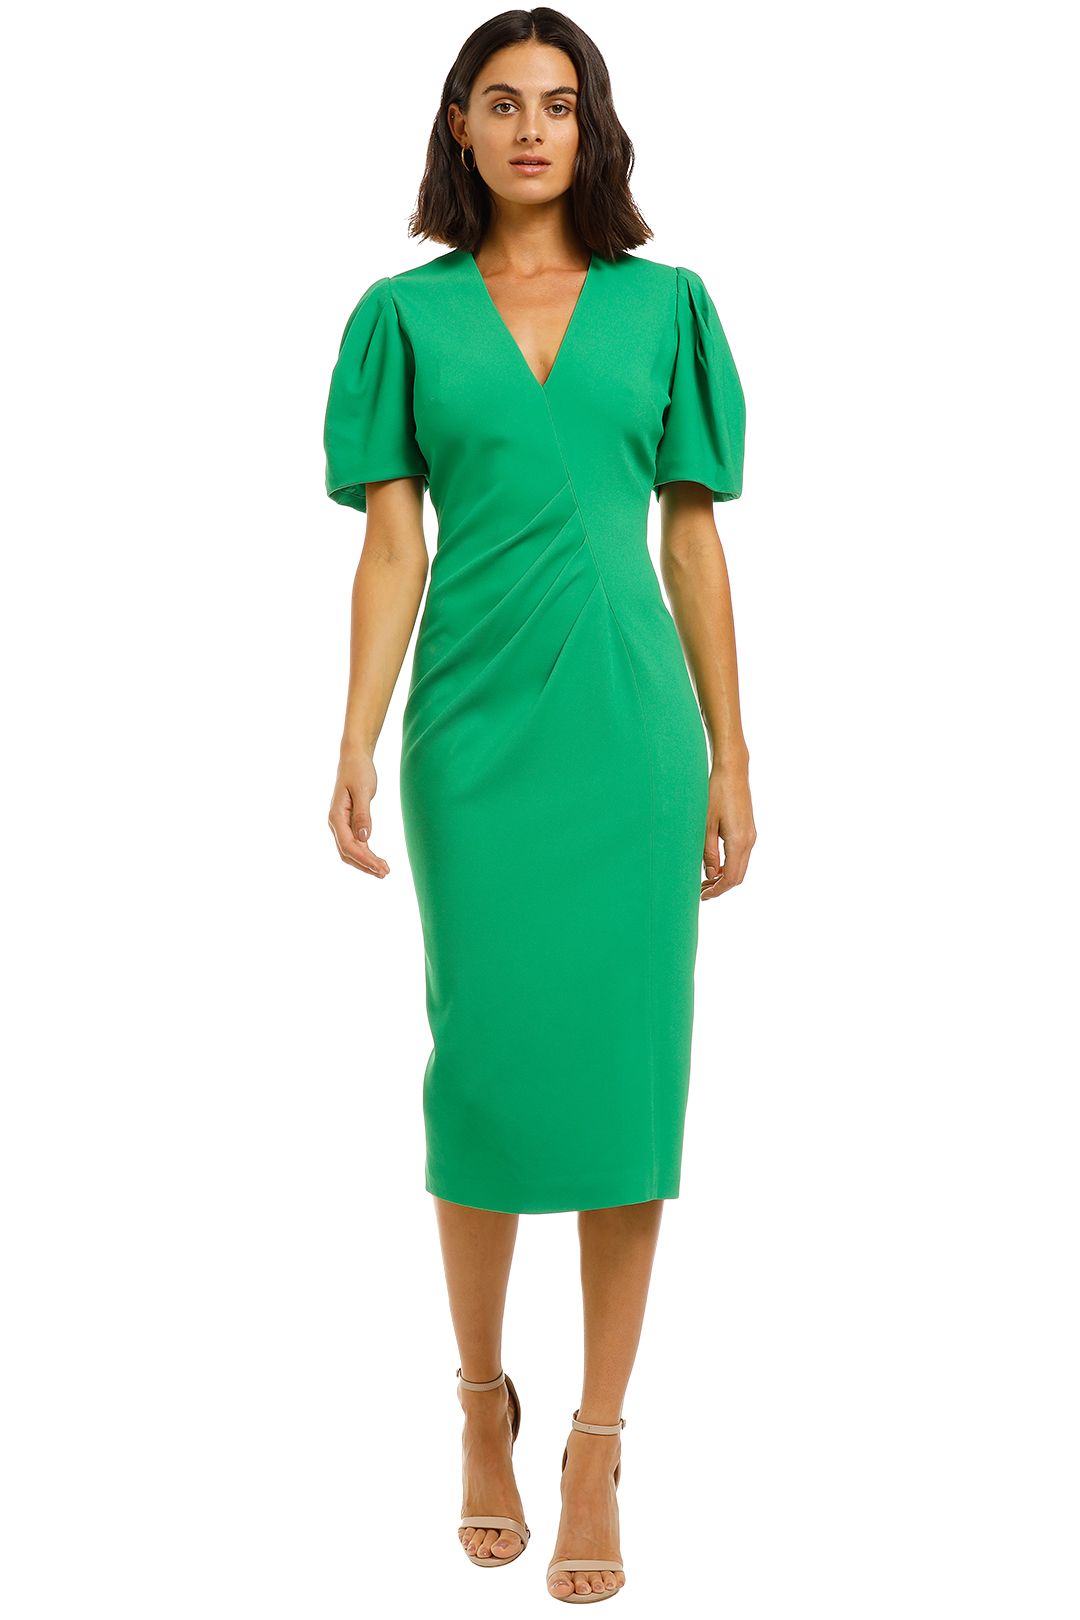 Ginger-and-Smart-Vortex-Dress-Neon-Green-Front